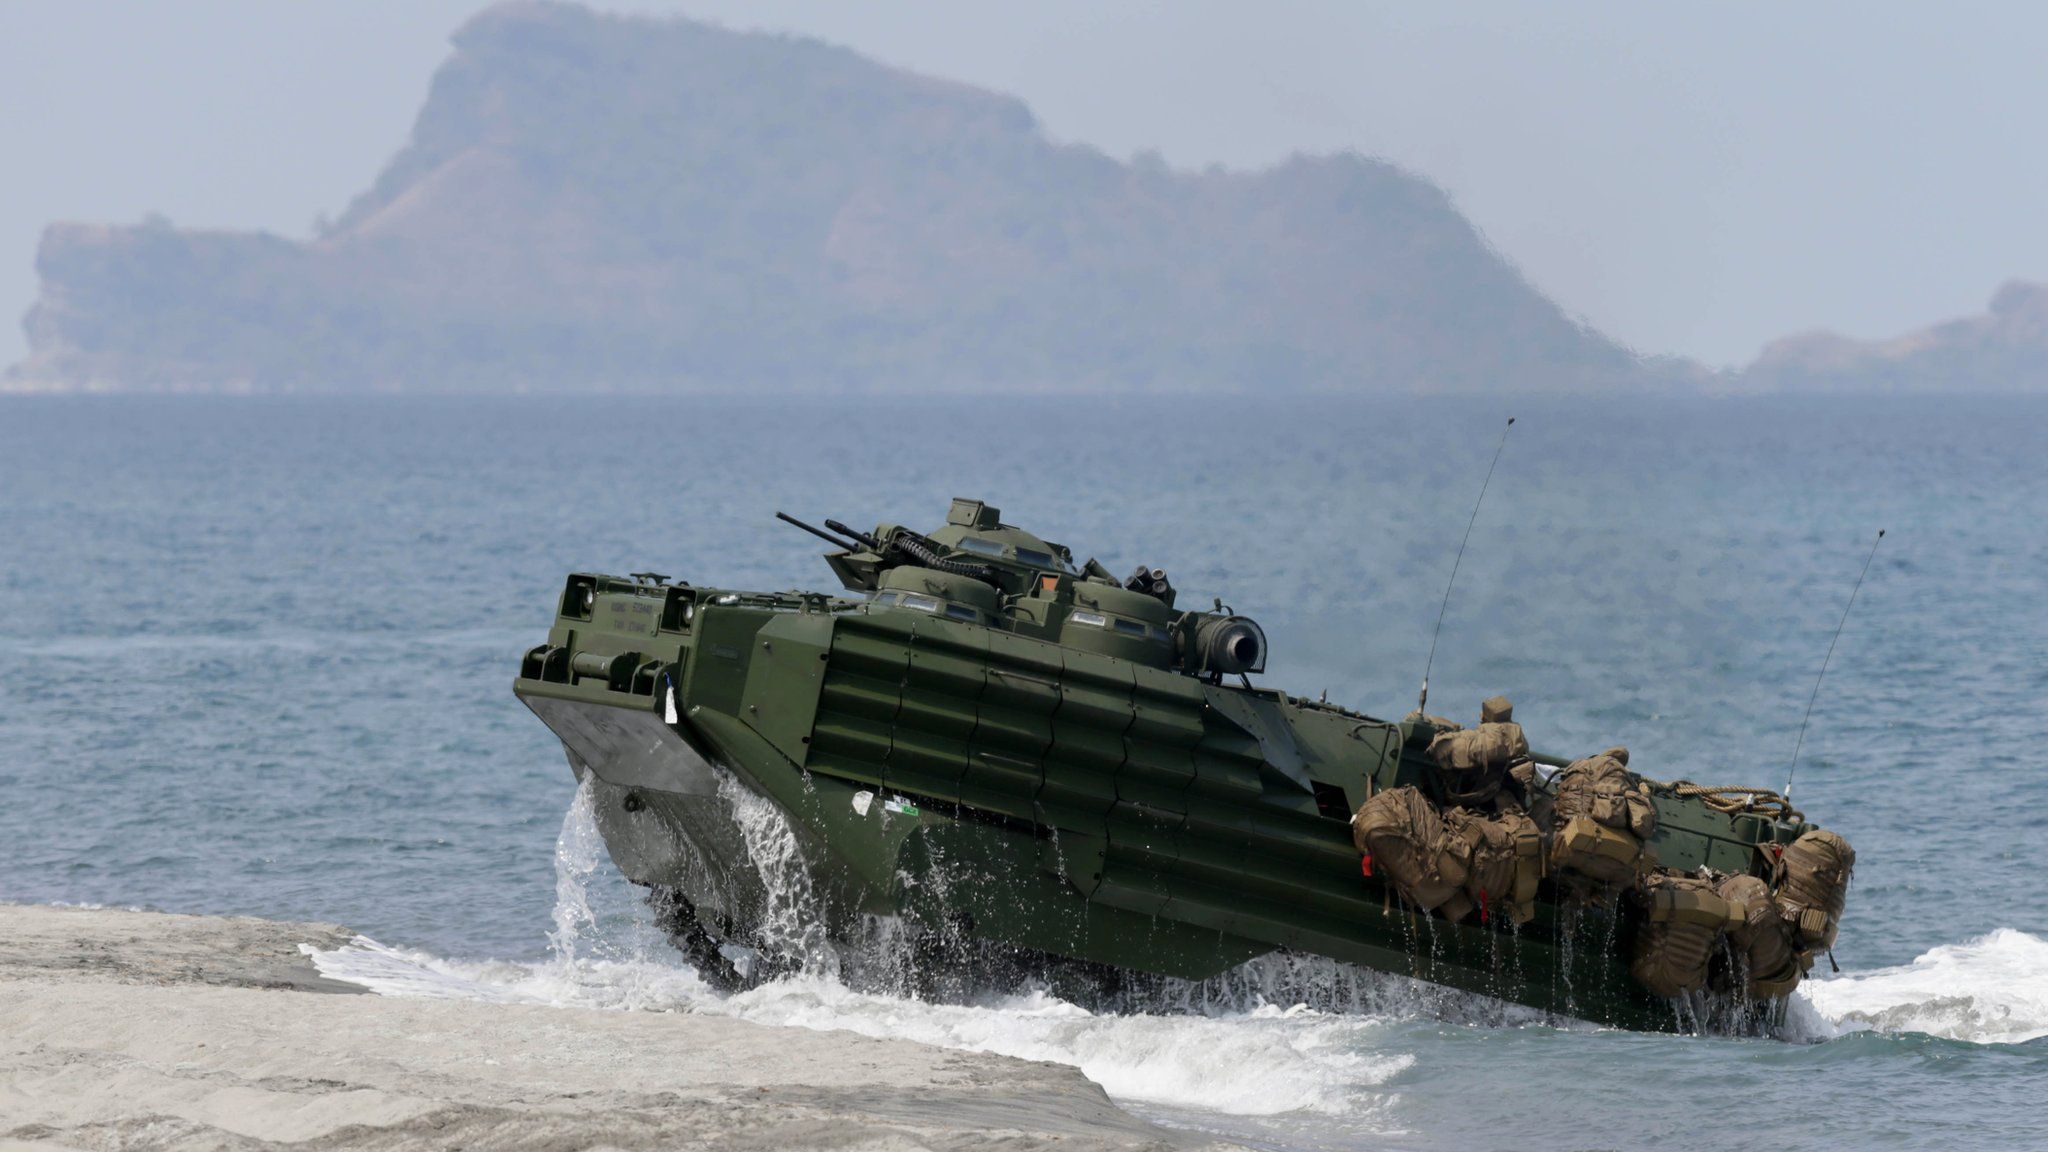 File photo: A US amphibious assault vehicle with Philippine and US troops on board storms the beach at a combined assault exercise at a beach facing one of the contested islands in the South China Sea known as the Scarborough Shoal in the West Philippine Sea, 21 April 2015